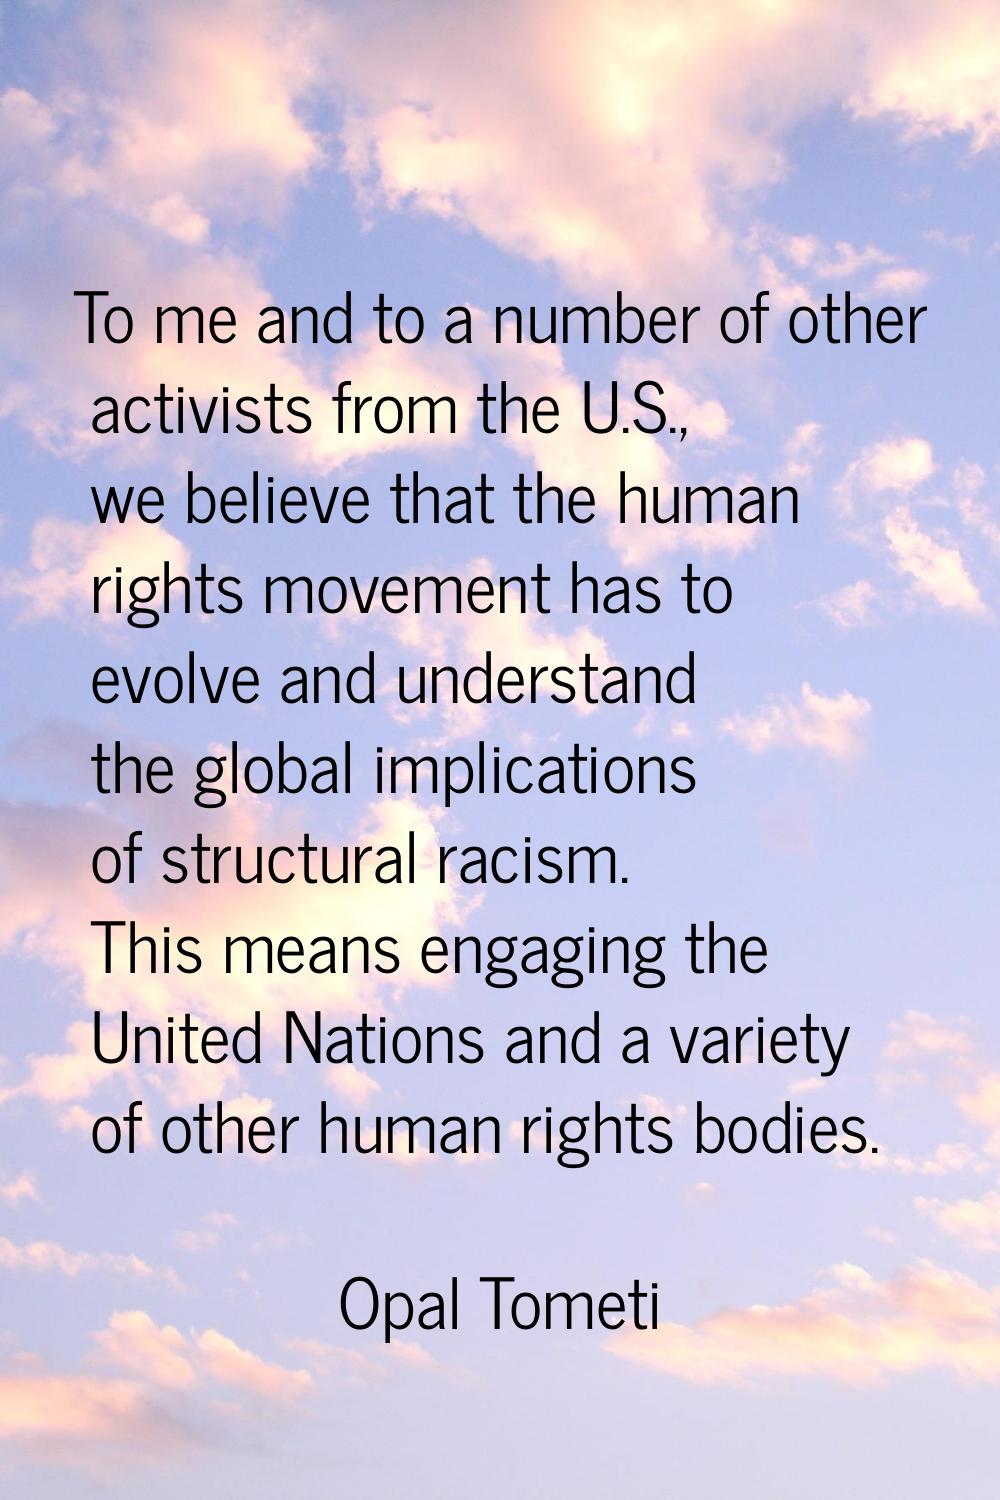 To me and to a number of other activists from the U.S., we believe that the human rights movement h